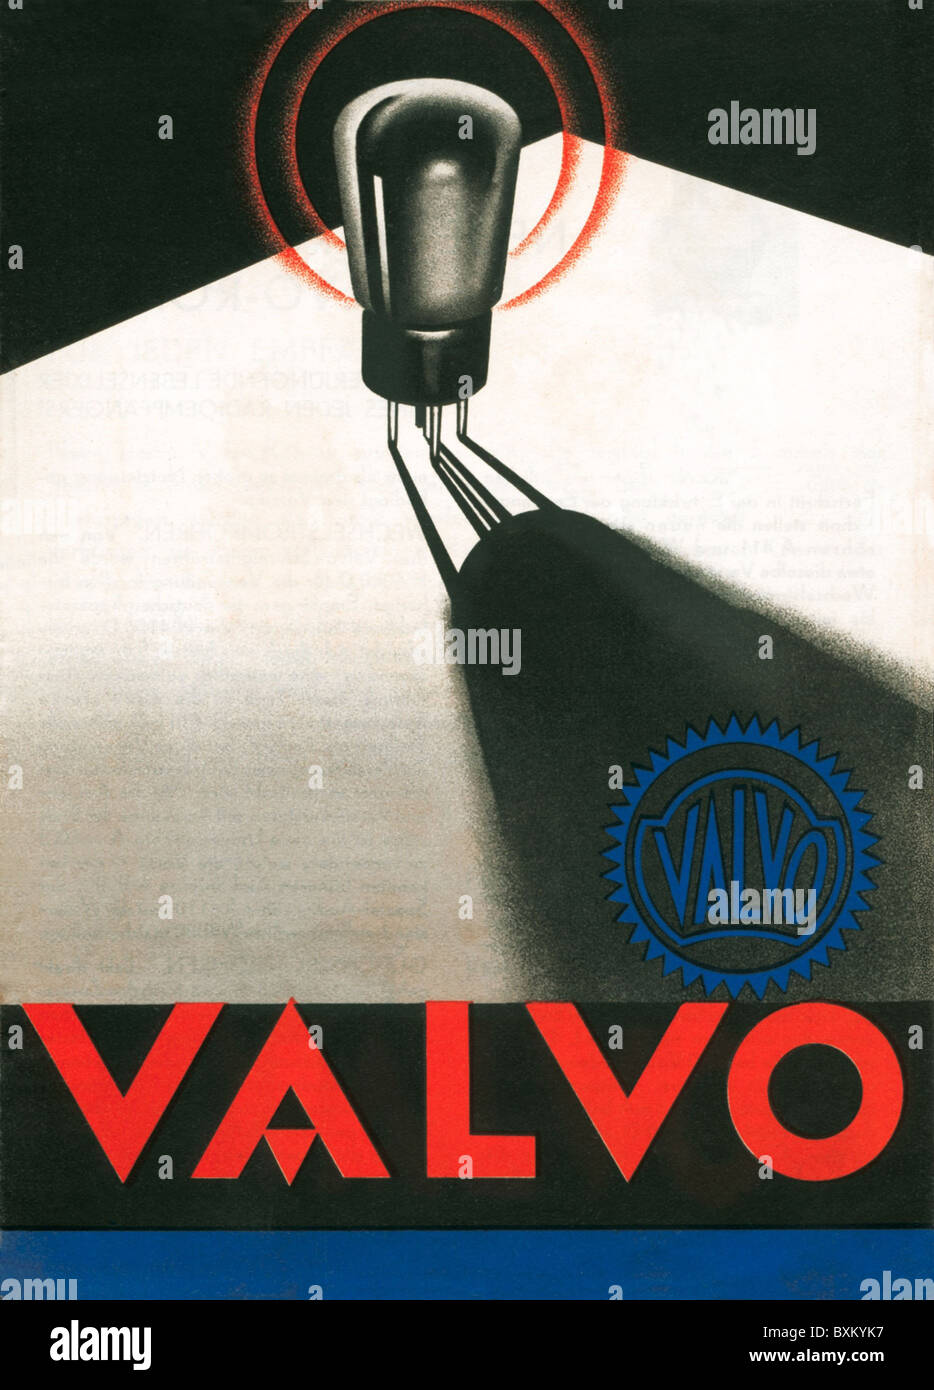 broadcast, radio, advertising for radio valve by Valvo, Germany, circa 1938, Additional-Rights-Clearences-Not Available Stock Photo